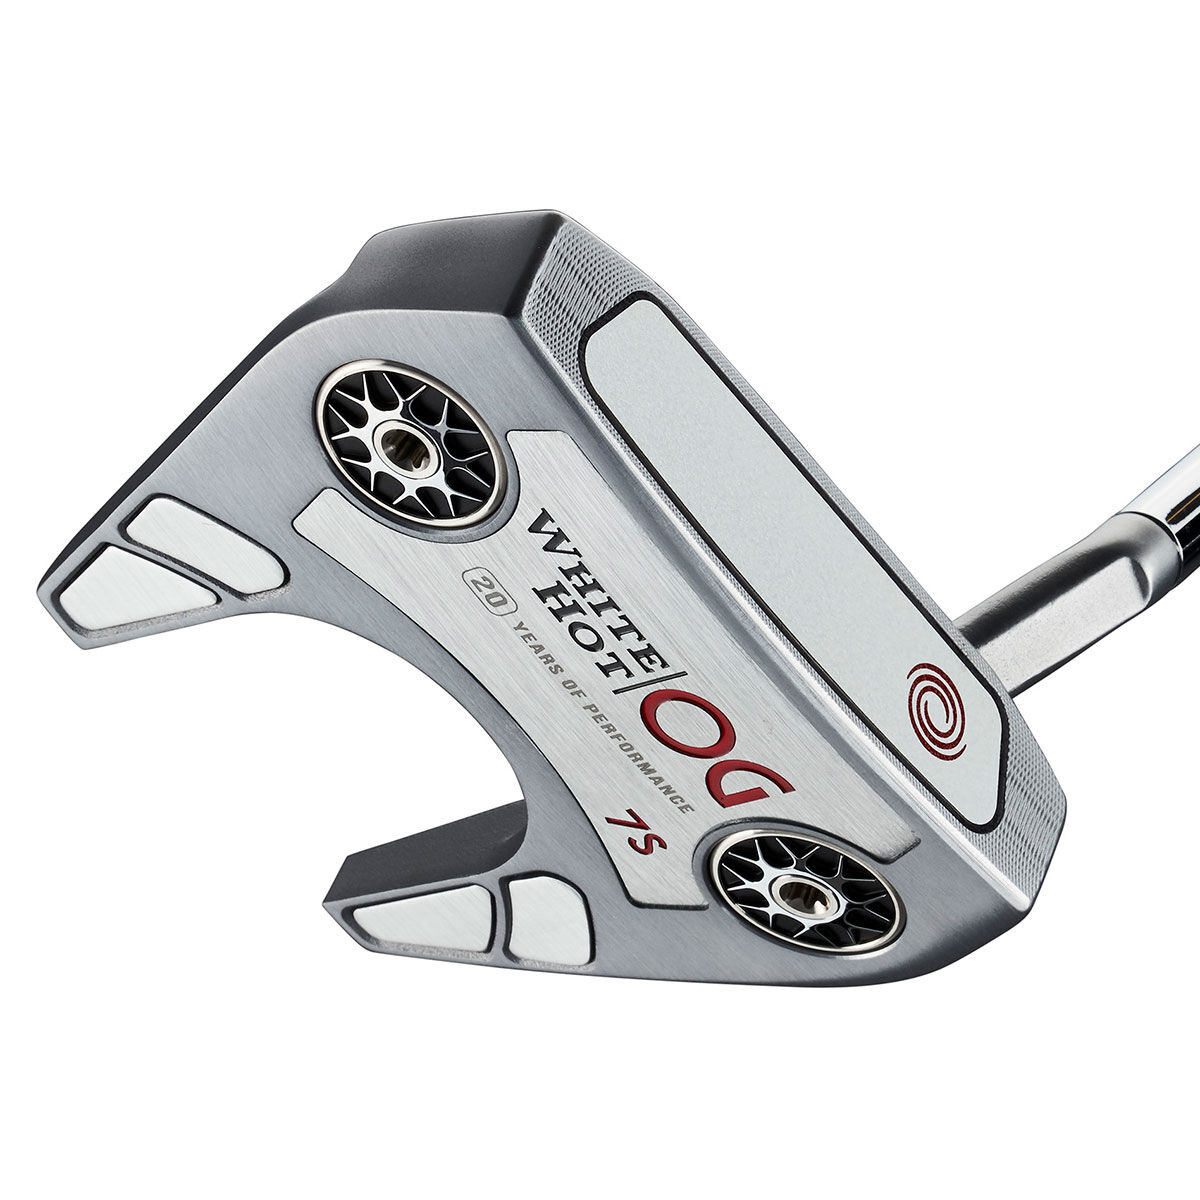 Odyssey Mens White and Silver Hot OG 7S Stroke Lab Right Hand Golf Putter, Size: 34" | American Golf von Odyssey